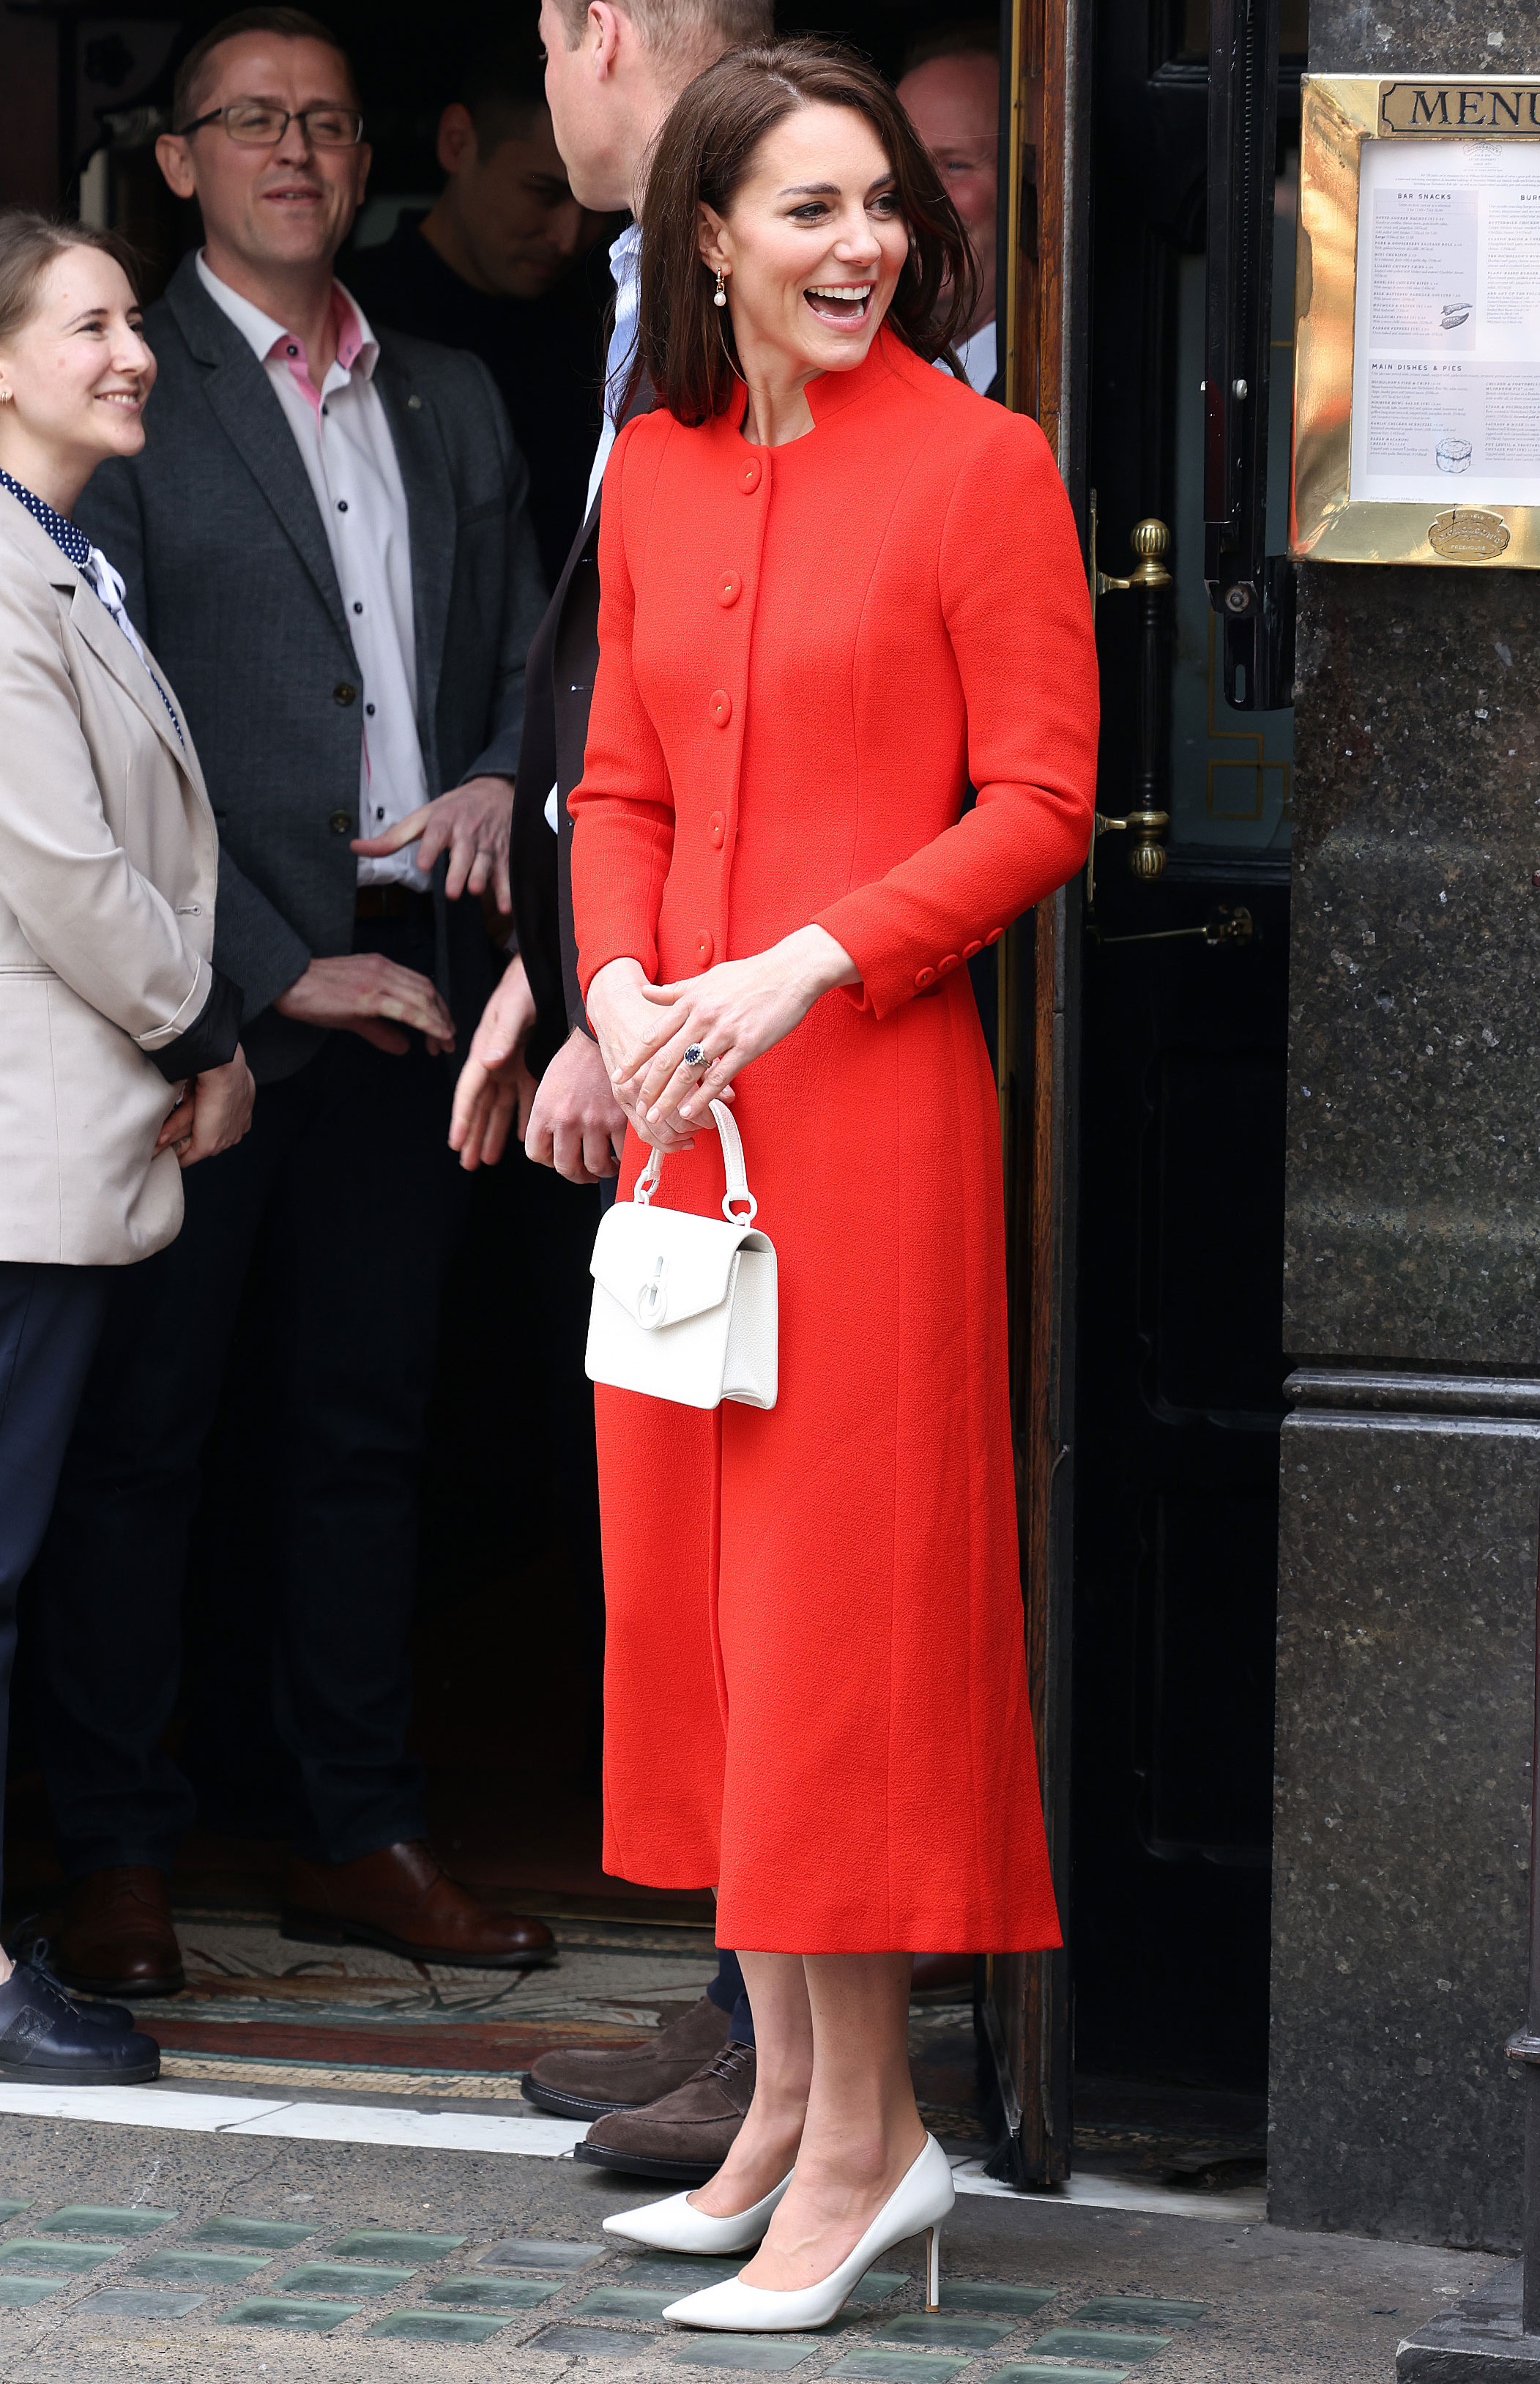 We're in love with Kate Middleton's go-to white Mulberry bag